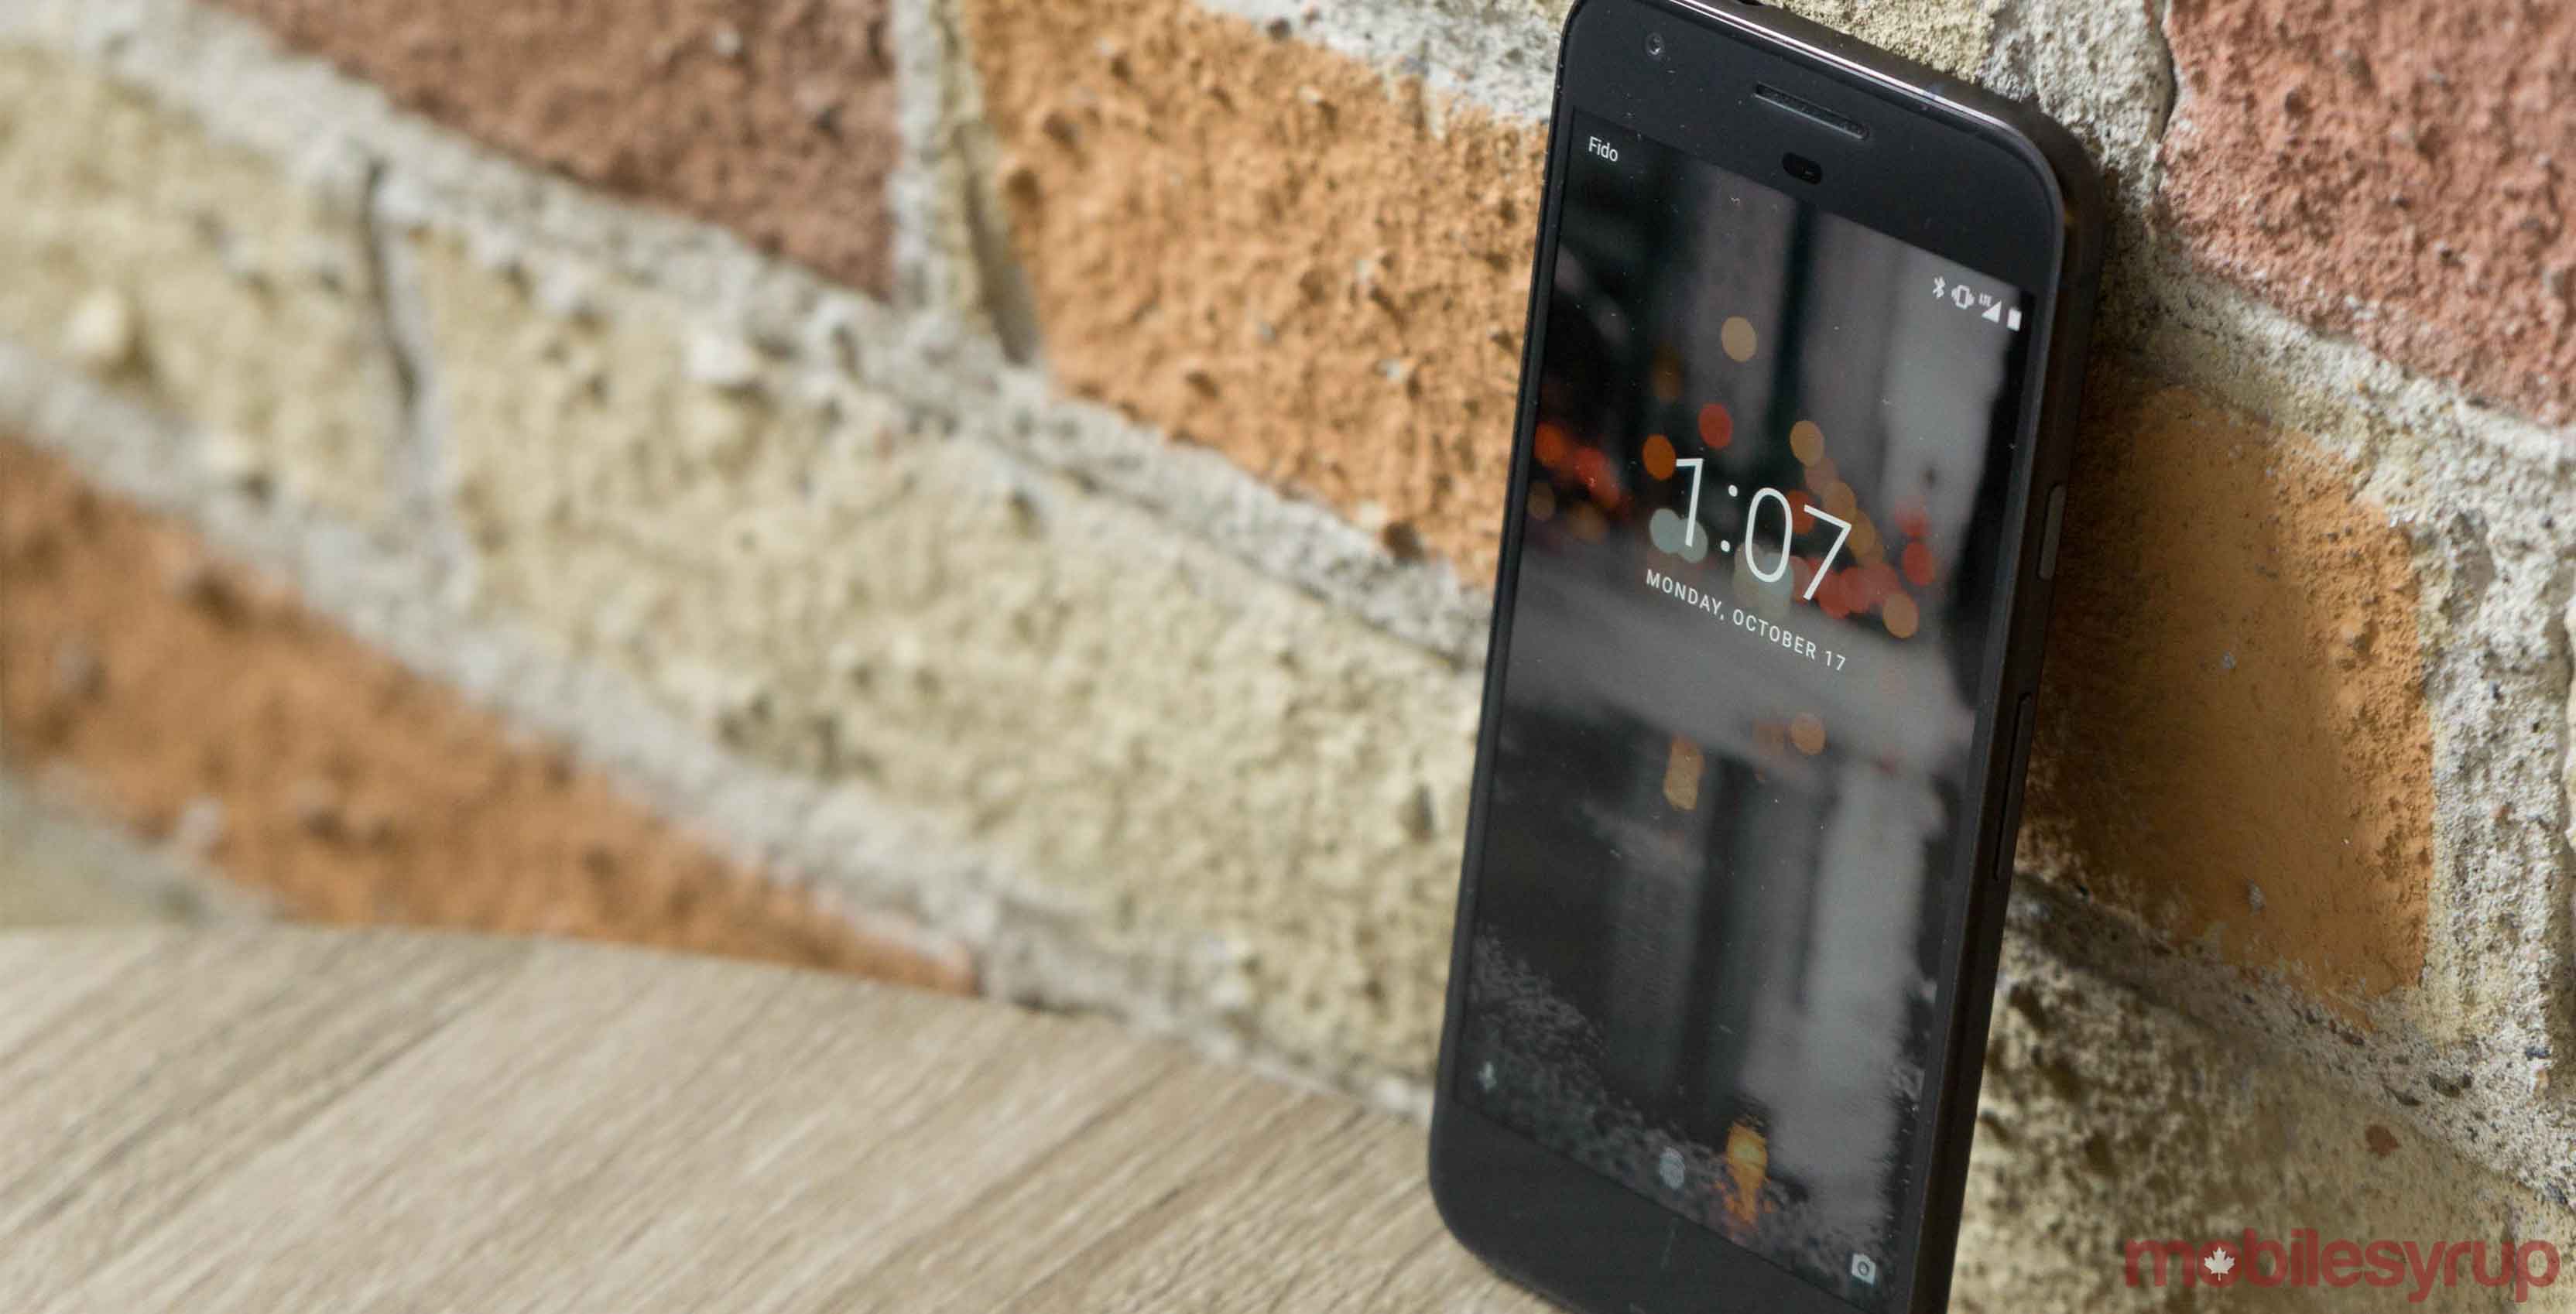 Google's Pixel smartphone leaning against a brick wall